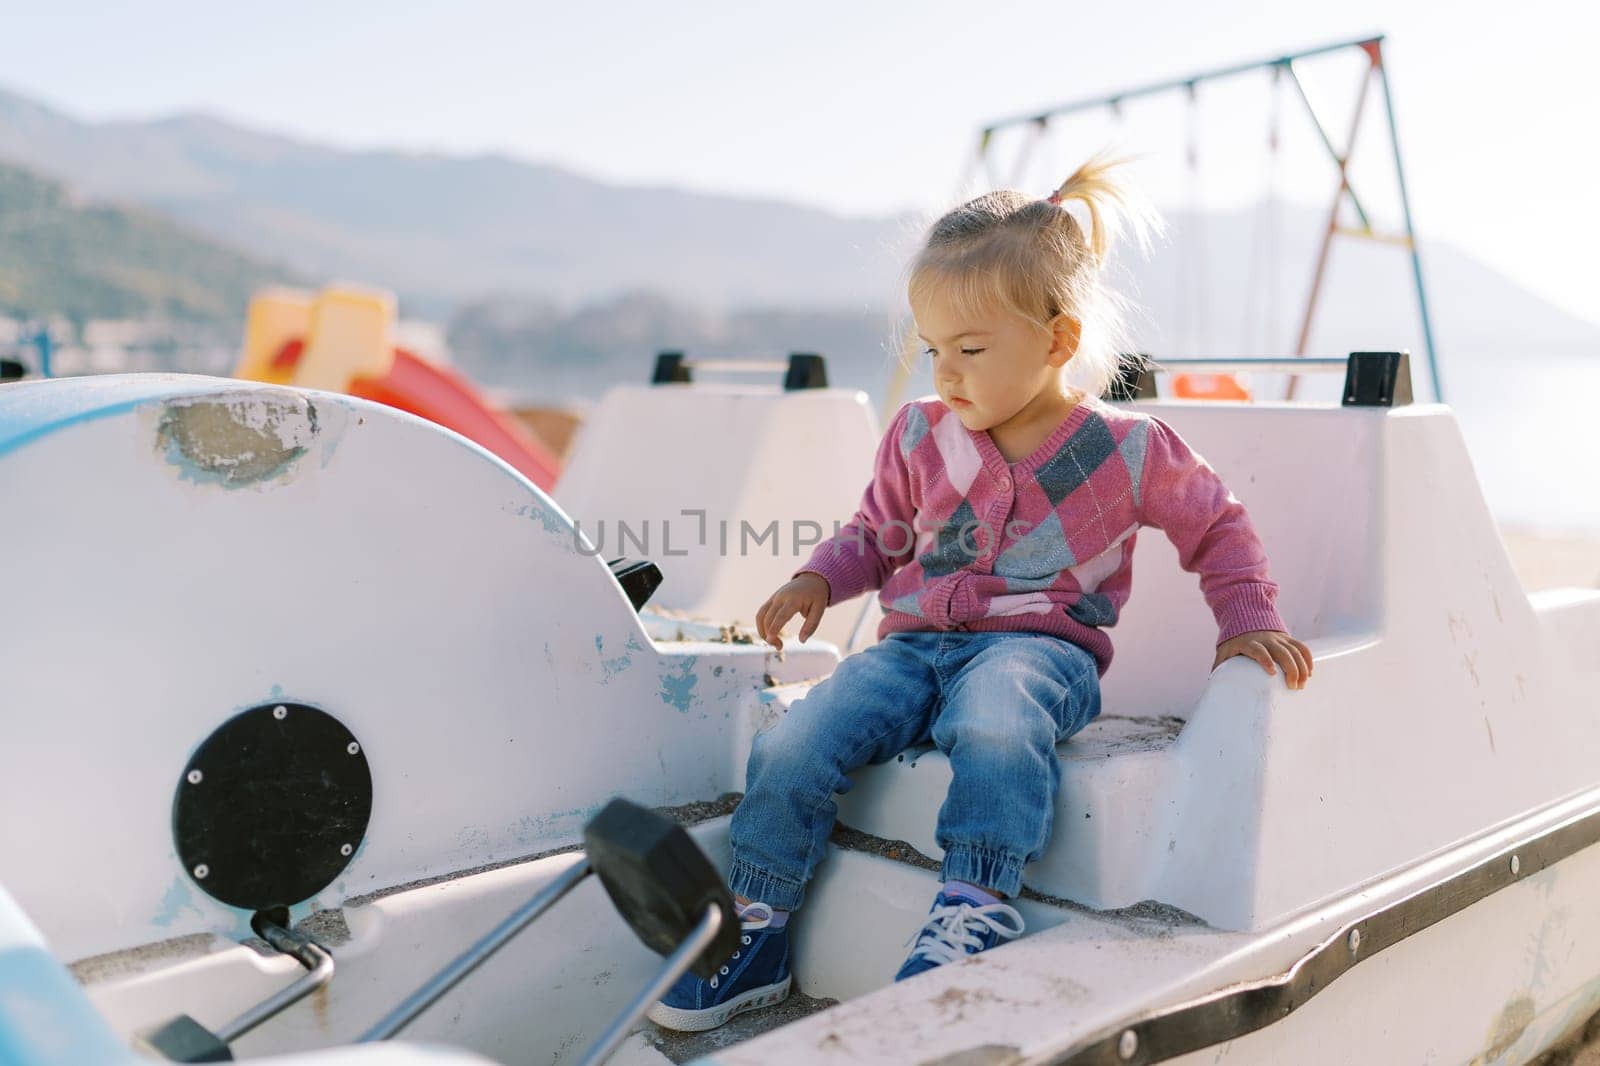 Little girl sits on the seat of a catamaran and looks at the pedals by Nadtochiy